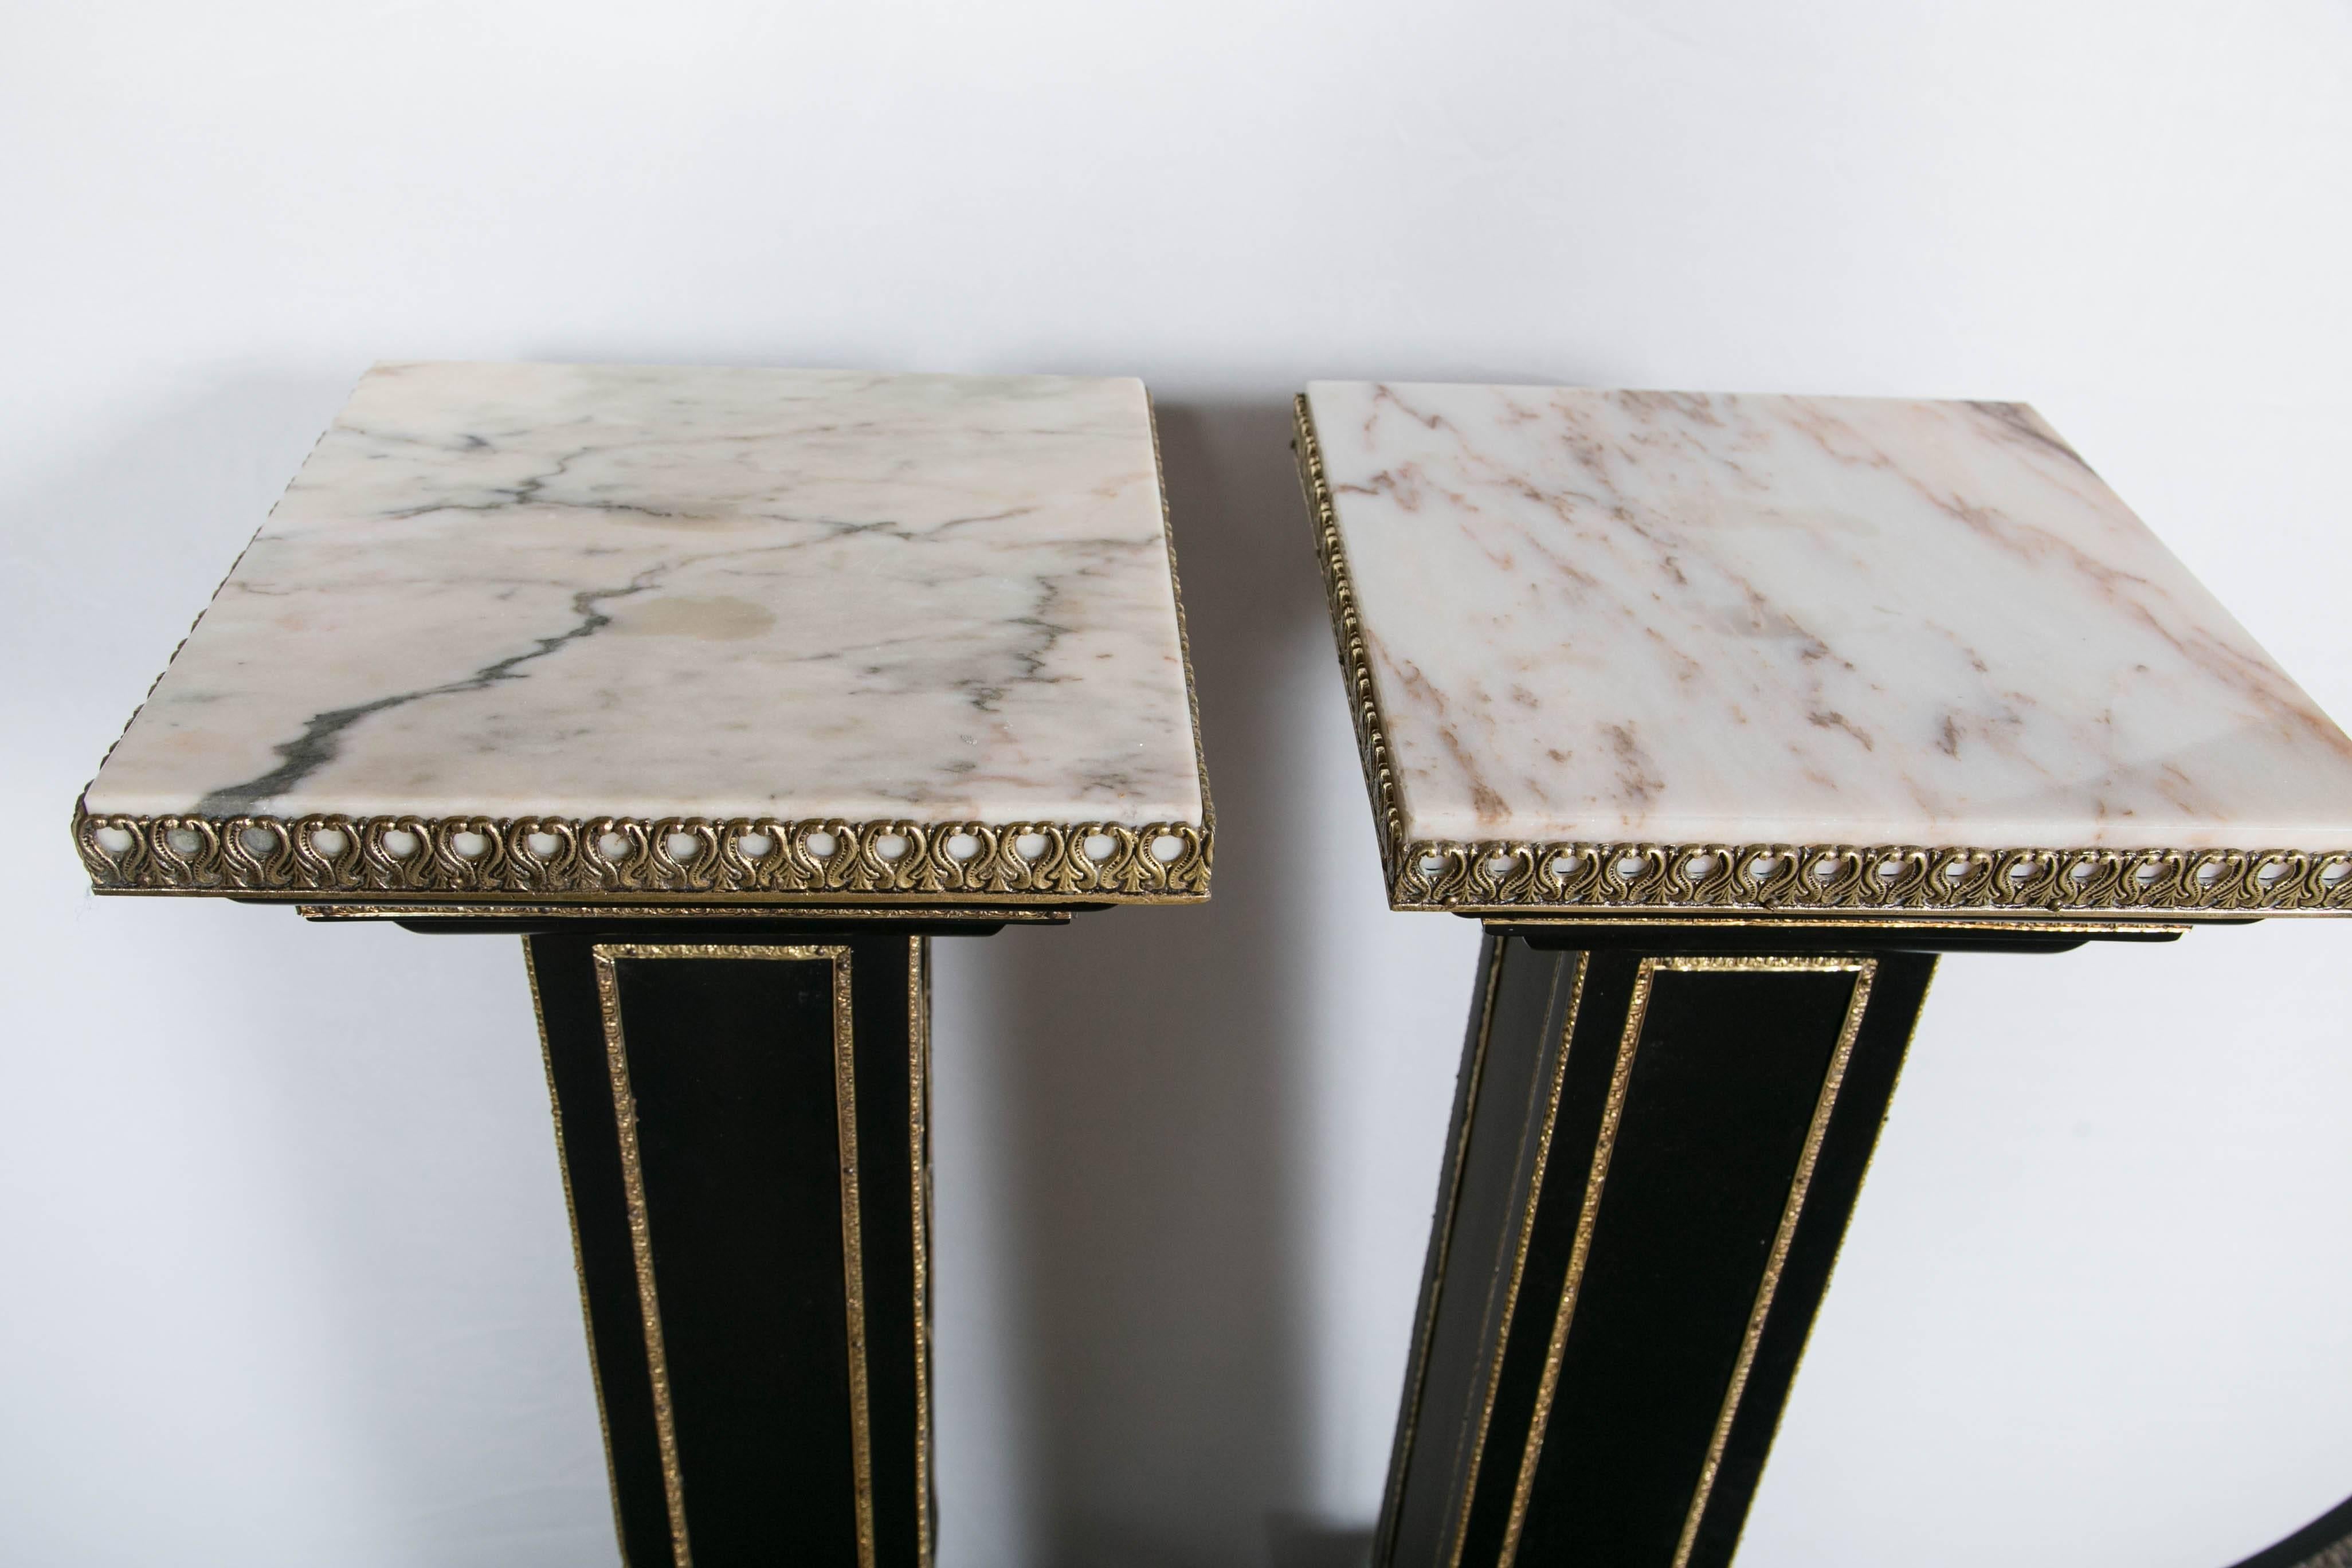 Maison Jansen, Hollywood Regency Pedestals, Ebonized Wood, Marble, Bronze, 1960s

Pair of bronze-mounted ebonized pedestals by Maison Jansen. Each having a square base on capped corner feet with bronze leaf decorations and bronze corners adorning an